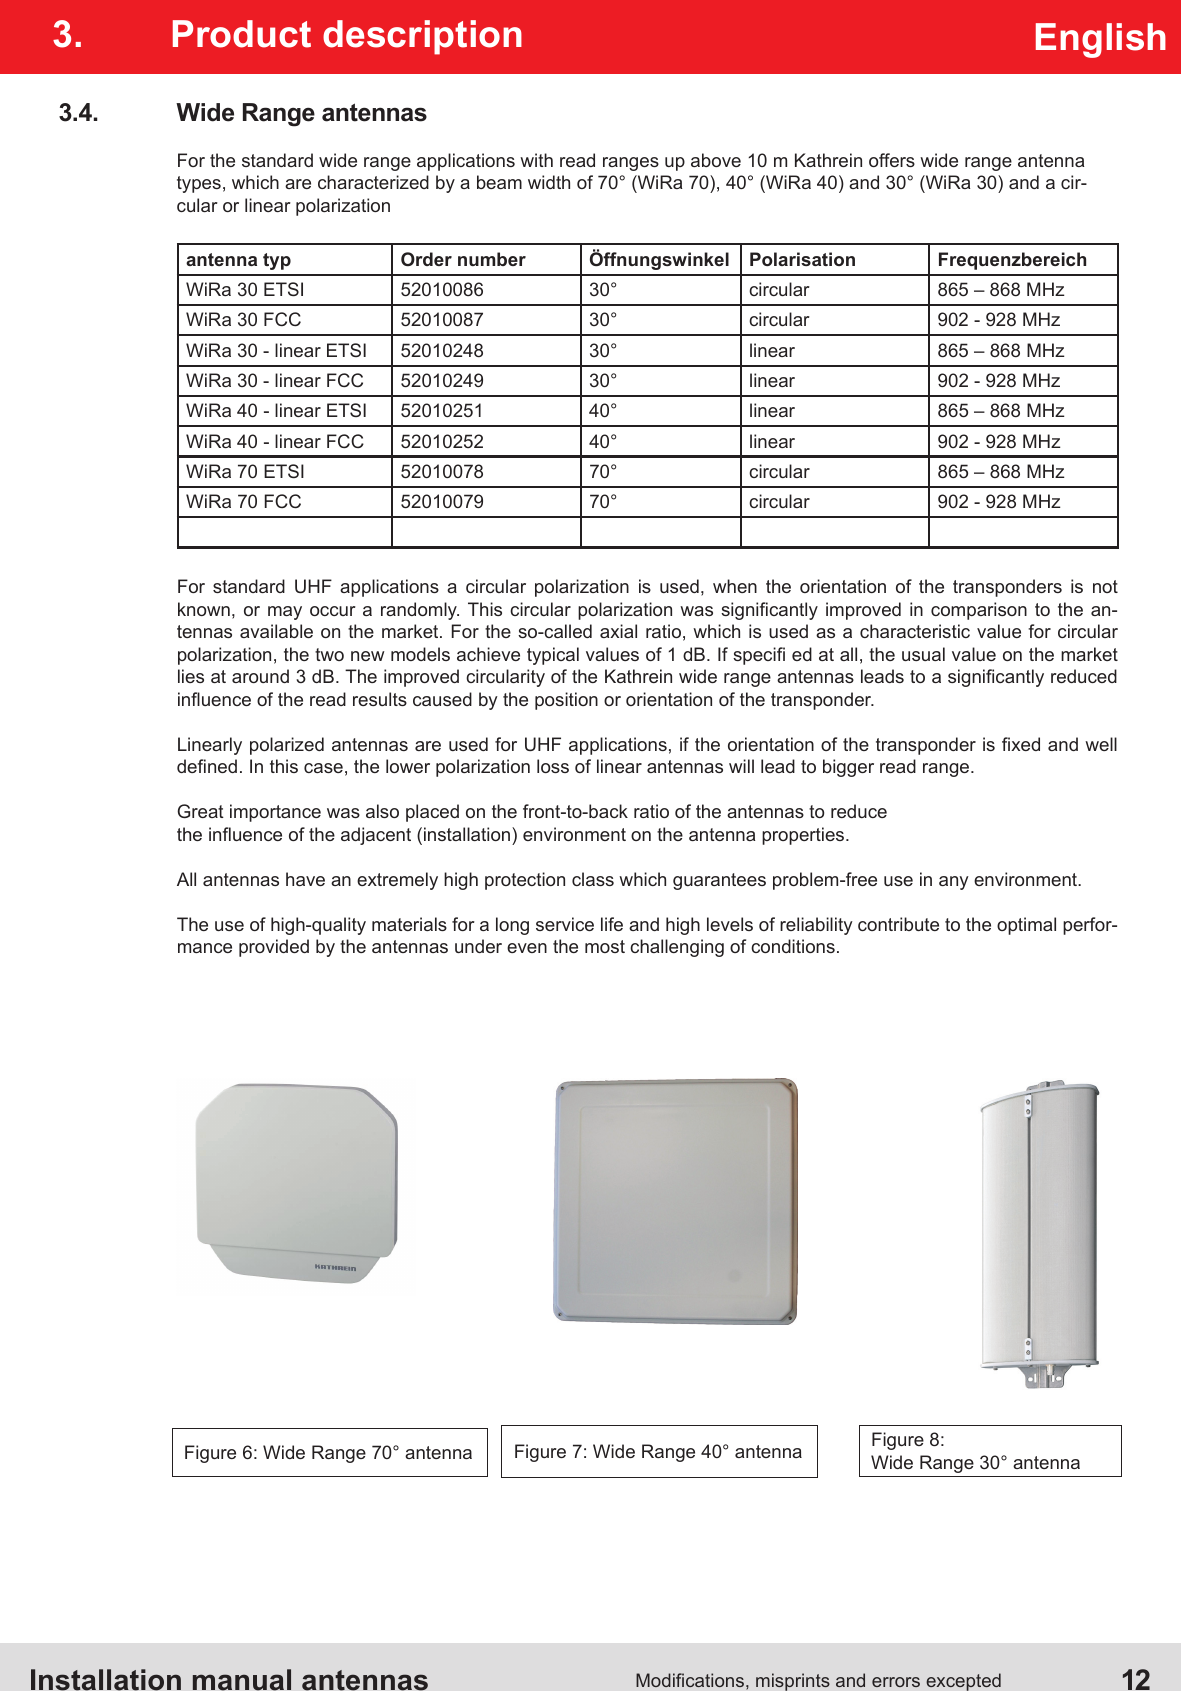 Installation manual antennas  12Modications, misprints and errors exceptedEnglish3.  Product description3.4.  Wide Range antennasFor the standard wide range applications with read ranges up above 10 m Kathrein offers wide range antenna types, which are characterized by a beam width of 70° (WiRa 70), 40° (WiRa 40) and 30° (WiRa 30) and a cir-cular or linear polarizationantenna typ Order number Öffnungswinkel Polarisation FrequenzbereichWiRa 30 ETSI 52010086 30° circular 865 – 868 MHzWiRa 30 FCC 52010087 30° circular 902 - 928 MHzWiRa 30 - linear ETSI 52010248 30° linear 865 – 868 MHzWiRa 30 - linear FCC 52010249 30° linear 902 - 928 MHzWiRa 40 - linear ETSI 52010251 40° linear 865 – 868 MHzWiRa 40 - linear FCC 52010252 40° linear 902 - 928 MHzWiRa 70 ETSI 52010078 70° circular 865 – 868 MHzWiRa 70 FCC 52010079 70° circular 902 - 928 MHzFor standard UHF applications a circular polarization is used, when the orientation of the transponders is not known, or may  occur a randomly. This circular  polarization was  signicantly improved in  comparison to the  an-tennas available on the market. For the so-called axial ratio, which is used as a characteristic value for circular polarization, the two new models achieve typical values of 1 dB. If speci ed at all, the usual value on the market lies at around 3 dB. The improved circularity of the Kathrein wide range antennas leads to a signicantly reduced inuence of the read results caused by the position or orientation of the transponder.Linearly polarized antennas are used for UHF applications, if the orientation of the transponder is xed and well dened. In this case, the lower polarization loss of linear antennas will lead to bigger read range.Great importance was also placed on the front-to-back ratio of the antennas to reduce the inuence of the adjacent (installation) environment on the antenna properties. All antennas have an extremely high protection class which guarantees problem-free use in any environment.The use of high-quality materials for a long service life and high levels of reliability contribute to the optimal perfor-mance provided by the antennas under even the most challenging of conditions.Figure 6: Wide Range 70° antenna Figure 8: Wide Range 30° antennaFigure 7: Wide Range 40° antenna